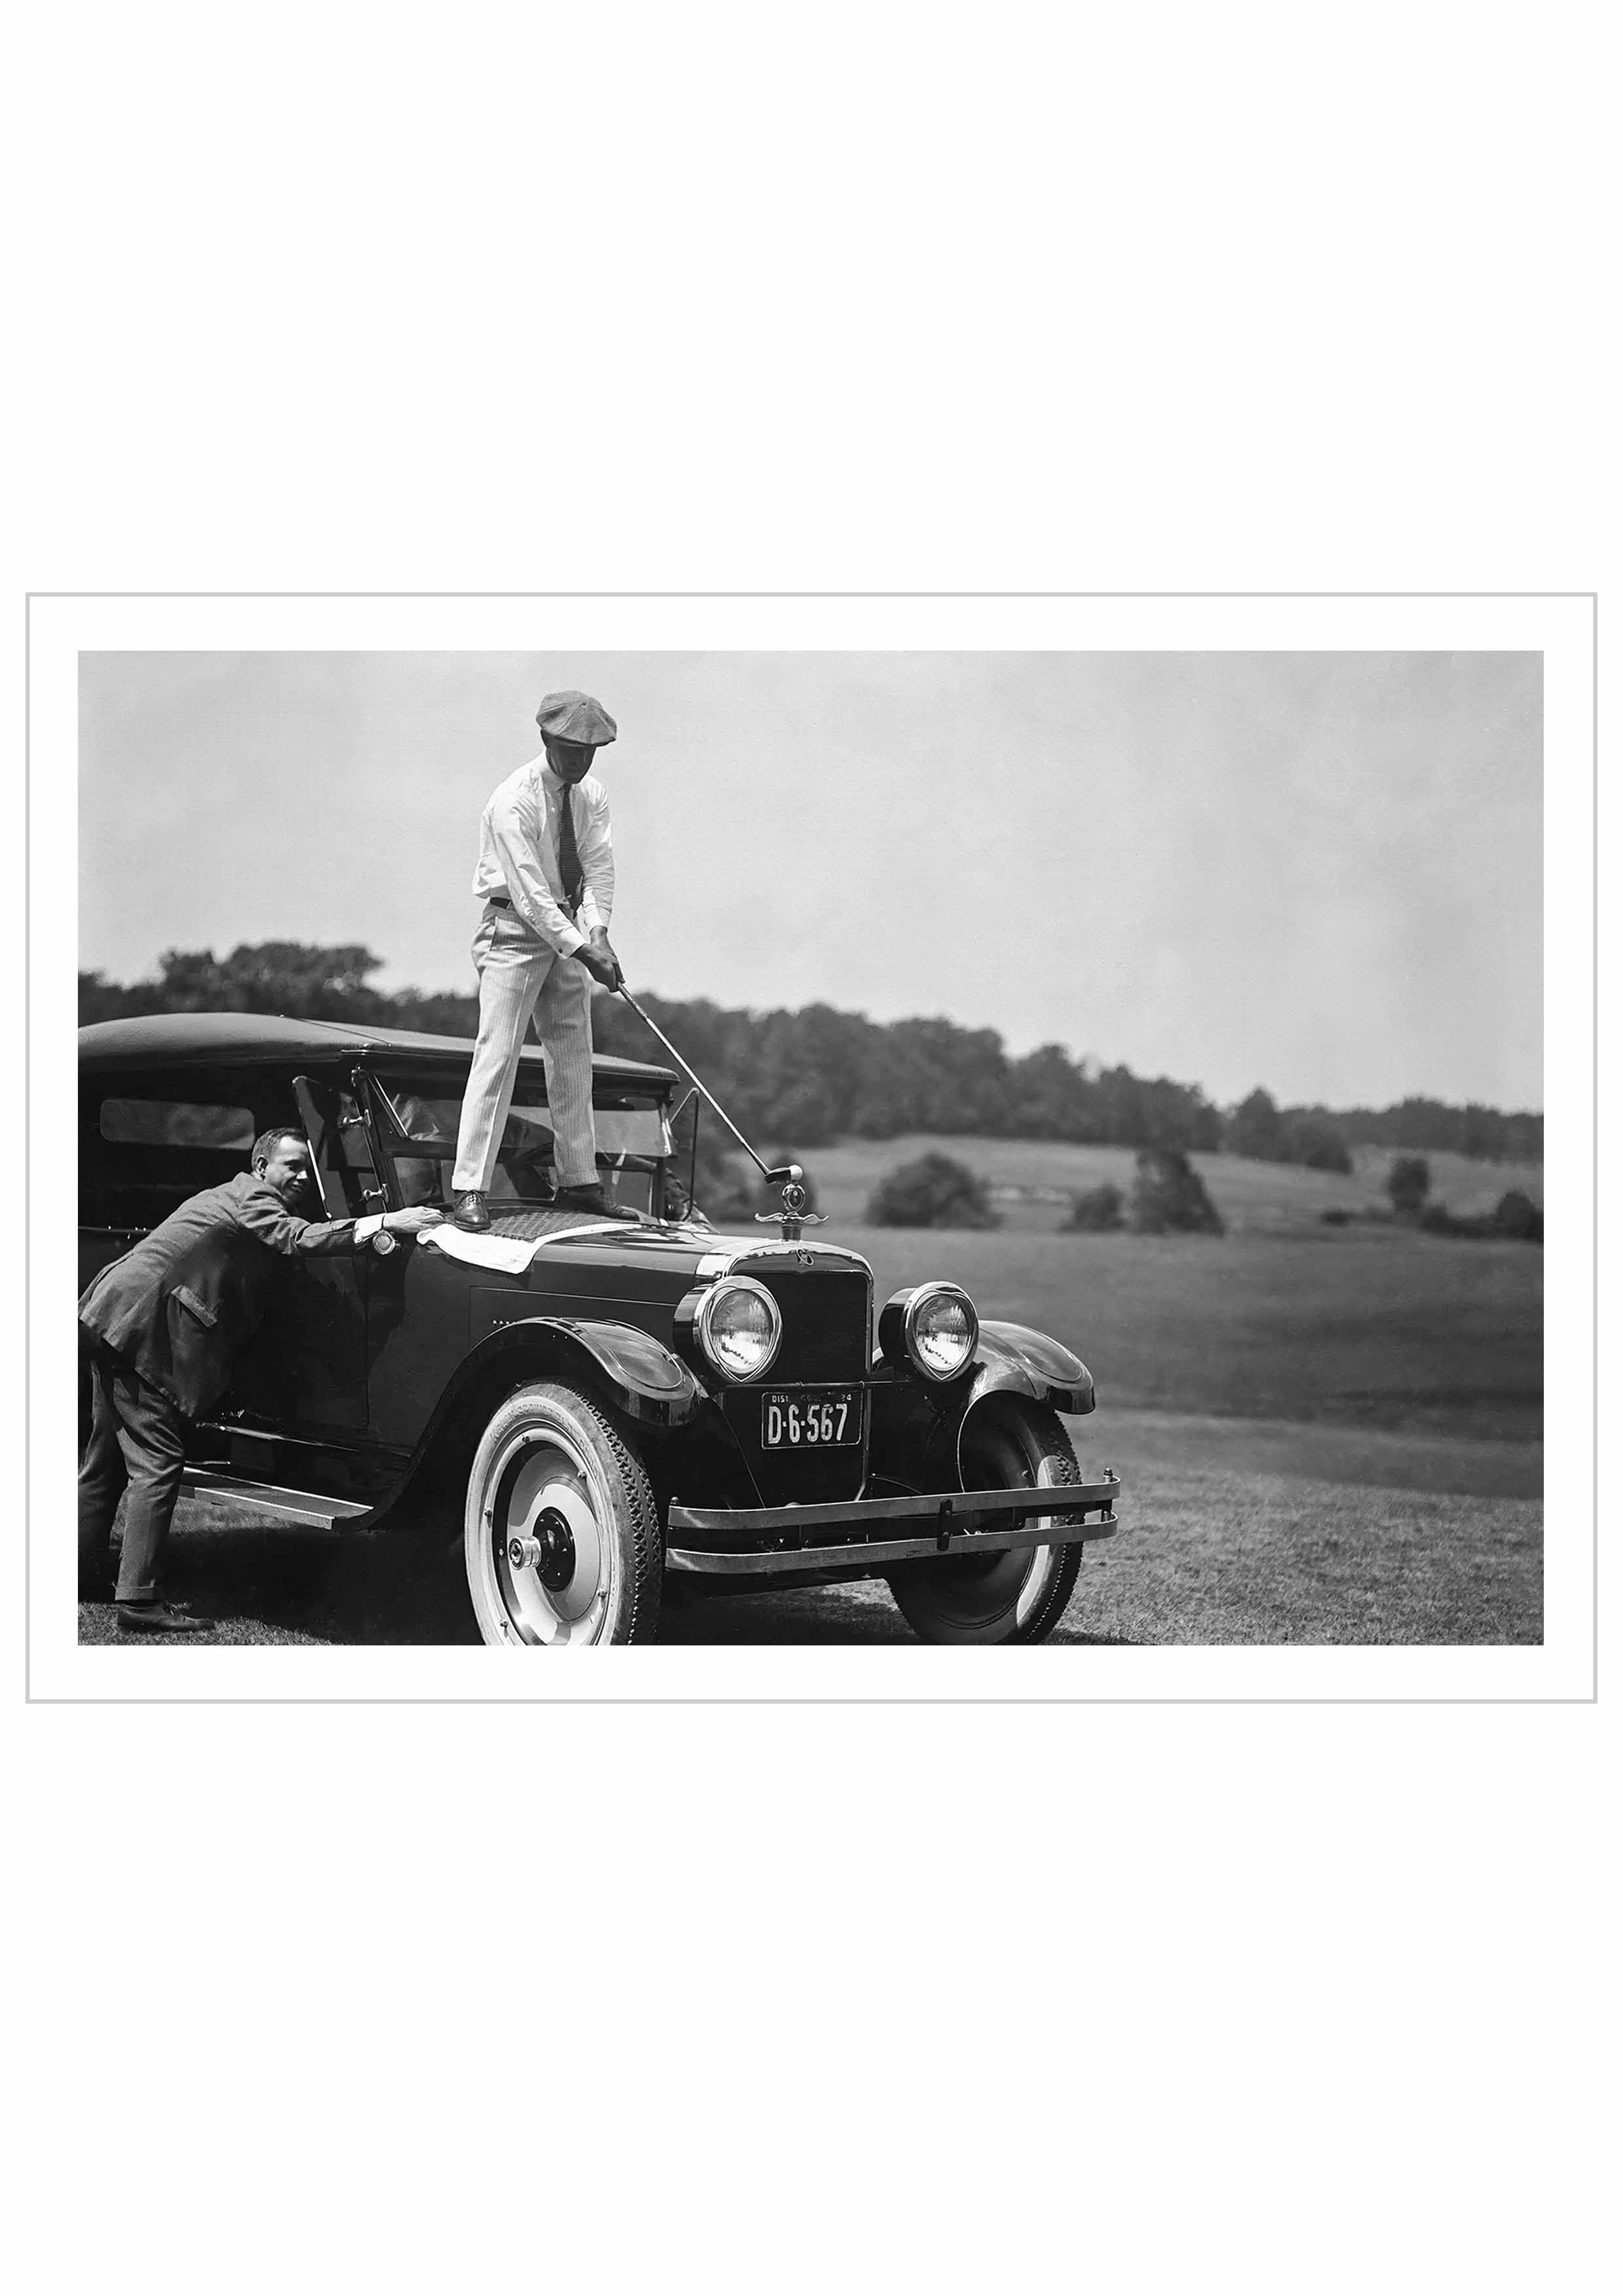 Golfing on top of a car, vintage historic photography 1920s.